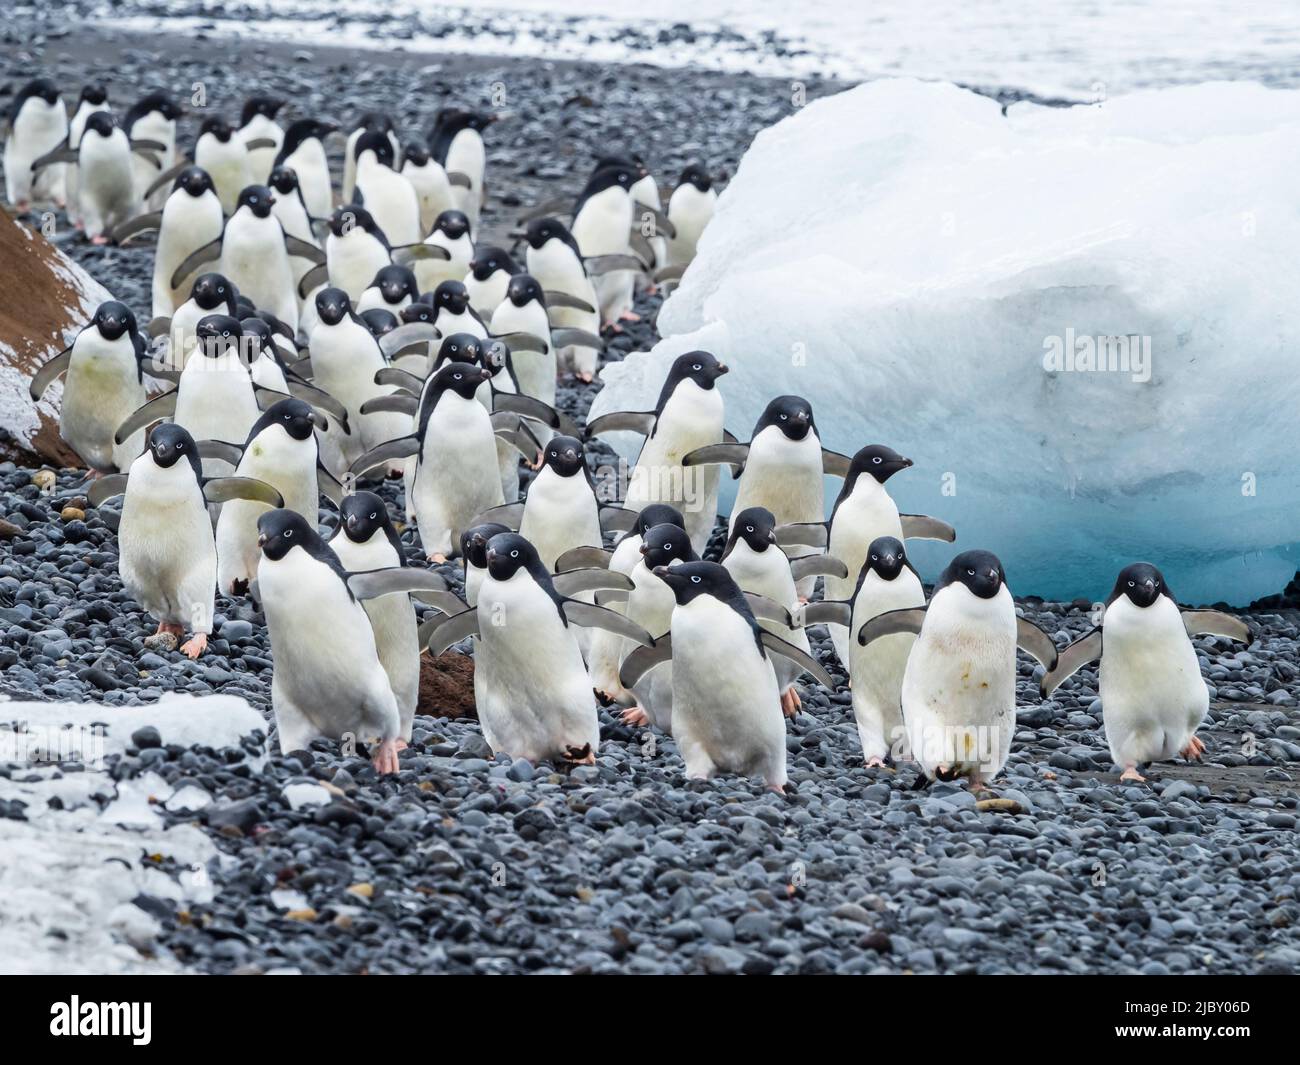 March of the Penguins, Adelie penguins (Pygoscelis adeliae) at Brown Bluff, Antarctic Peninsula Stock Photo